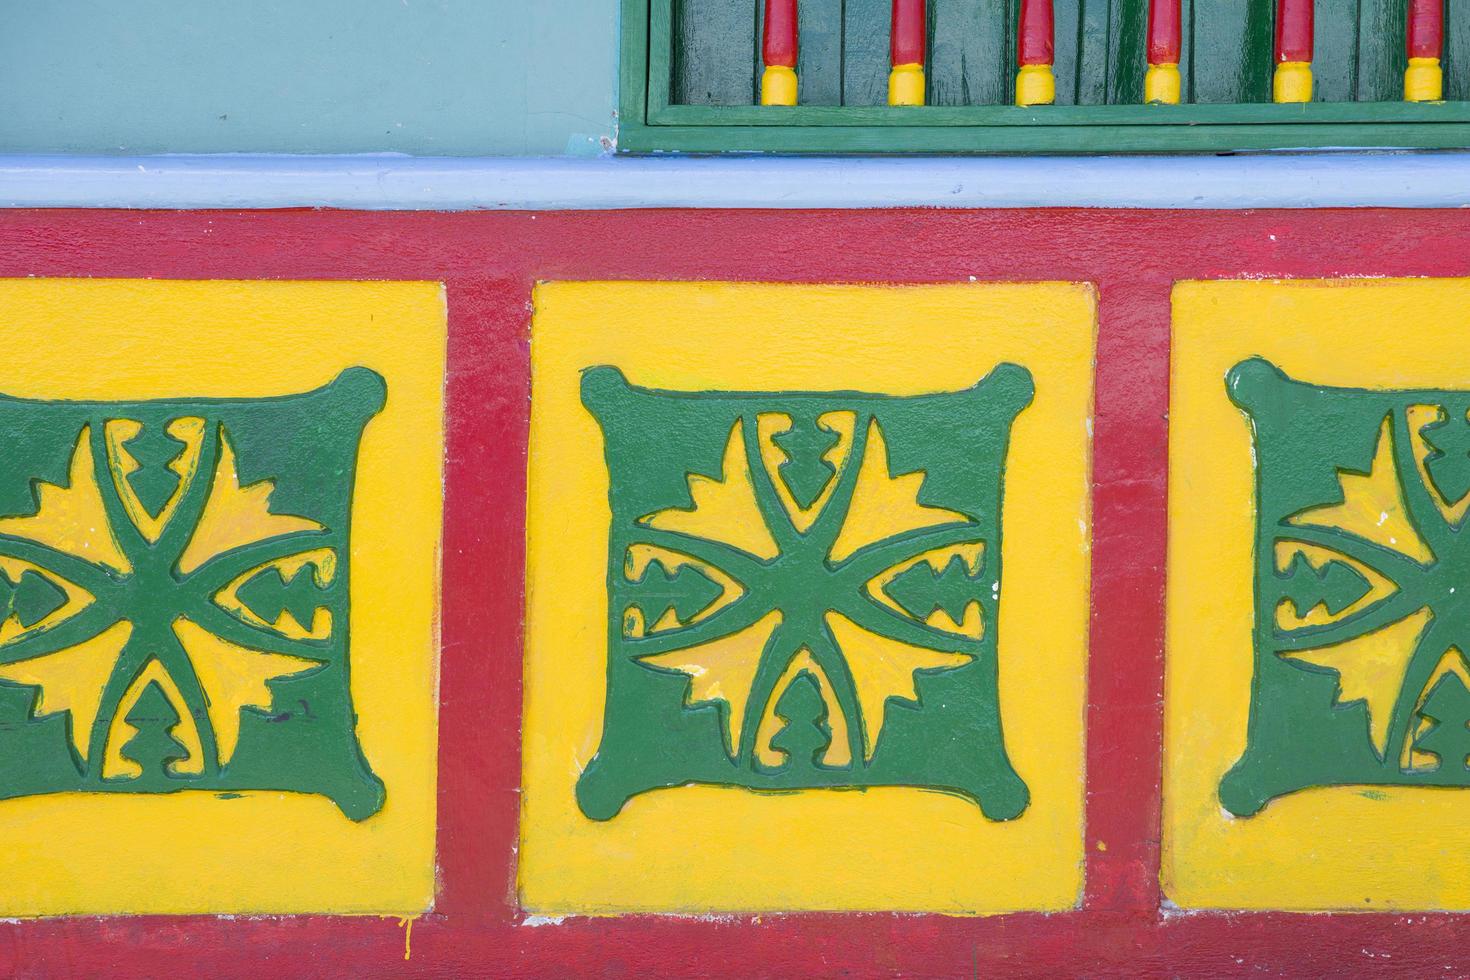 GUATAPE, COLOMBIA, 2019 - Detail from colorful facade on the building in Guatape, Colombia. Each building in town Guatape has bright color tiles along the lower part of facade. photo